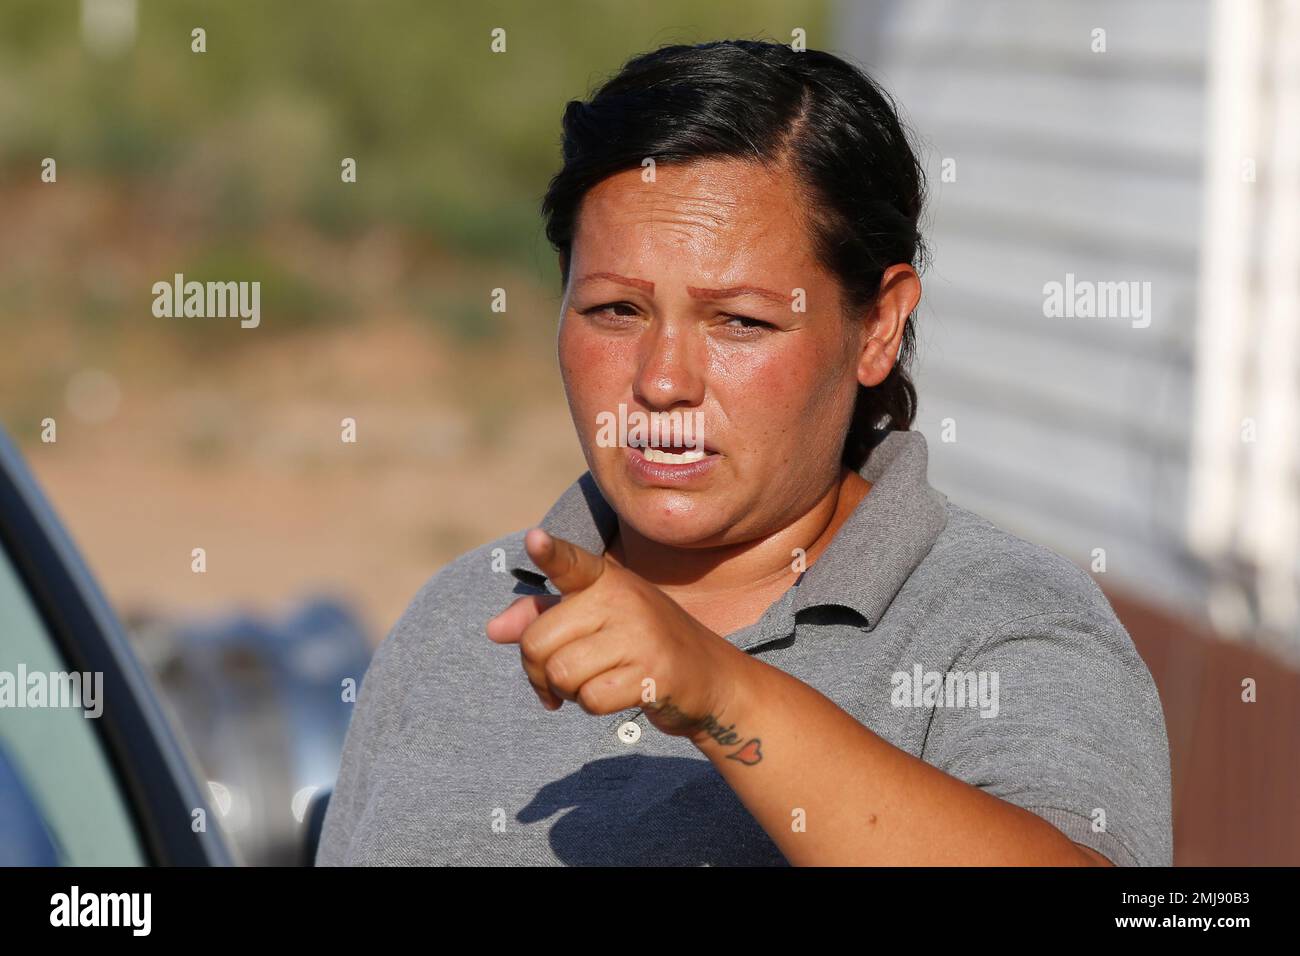 https://c8.alamy.com/comp/2MJ90B3/rocio-gutierrez-a-neighbor-of-seth-ator-the-alleged-gunman-in-a-west-texas-rampage-saturday-says-that-ator-was-a-violent-aggressive-person-that-would-shoot-at-animals-mostly-rabbits-at-all-hours-of-the-night-during-an-interview-monday-sept-2-2019-near-odessa-texas-ap-photosue-ogrocki-2MJ90B3.jpg